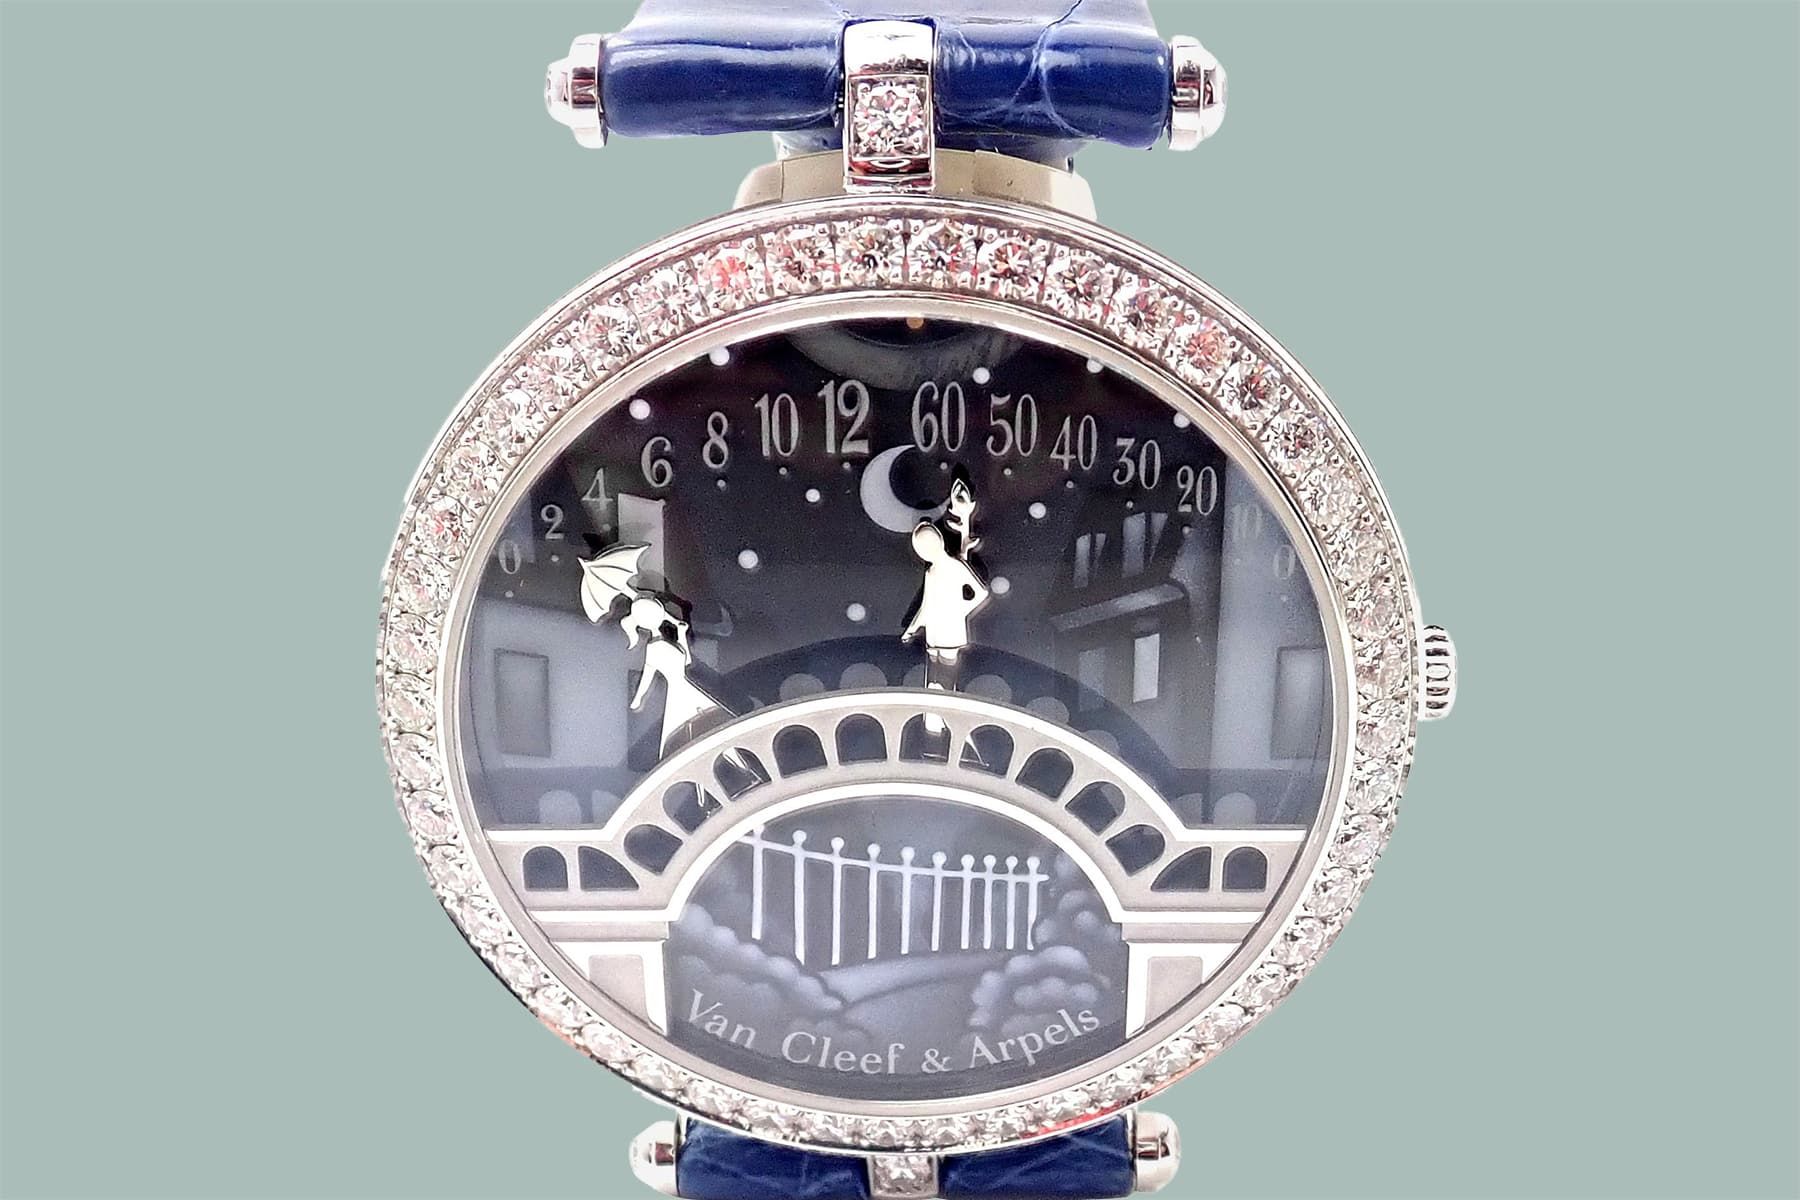 A Mini Romance Plays Out on the Dial of This Van Cleef and Arpels Watch